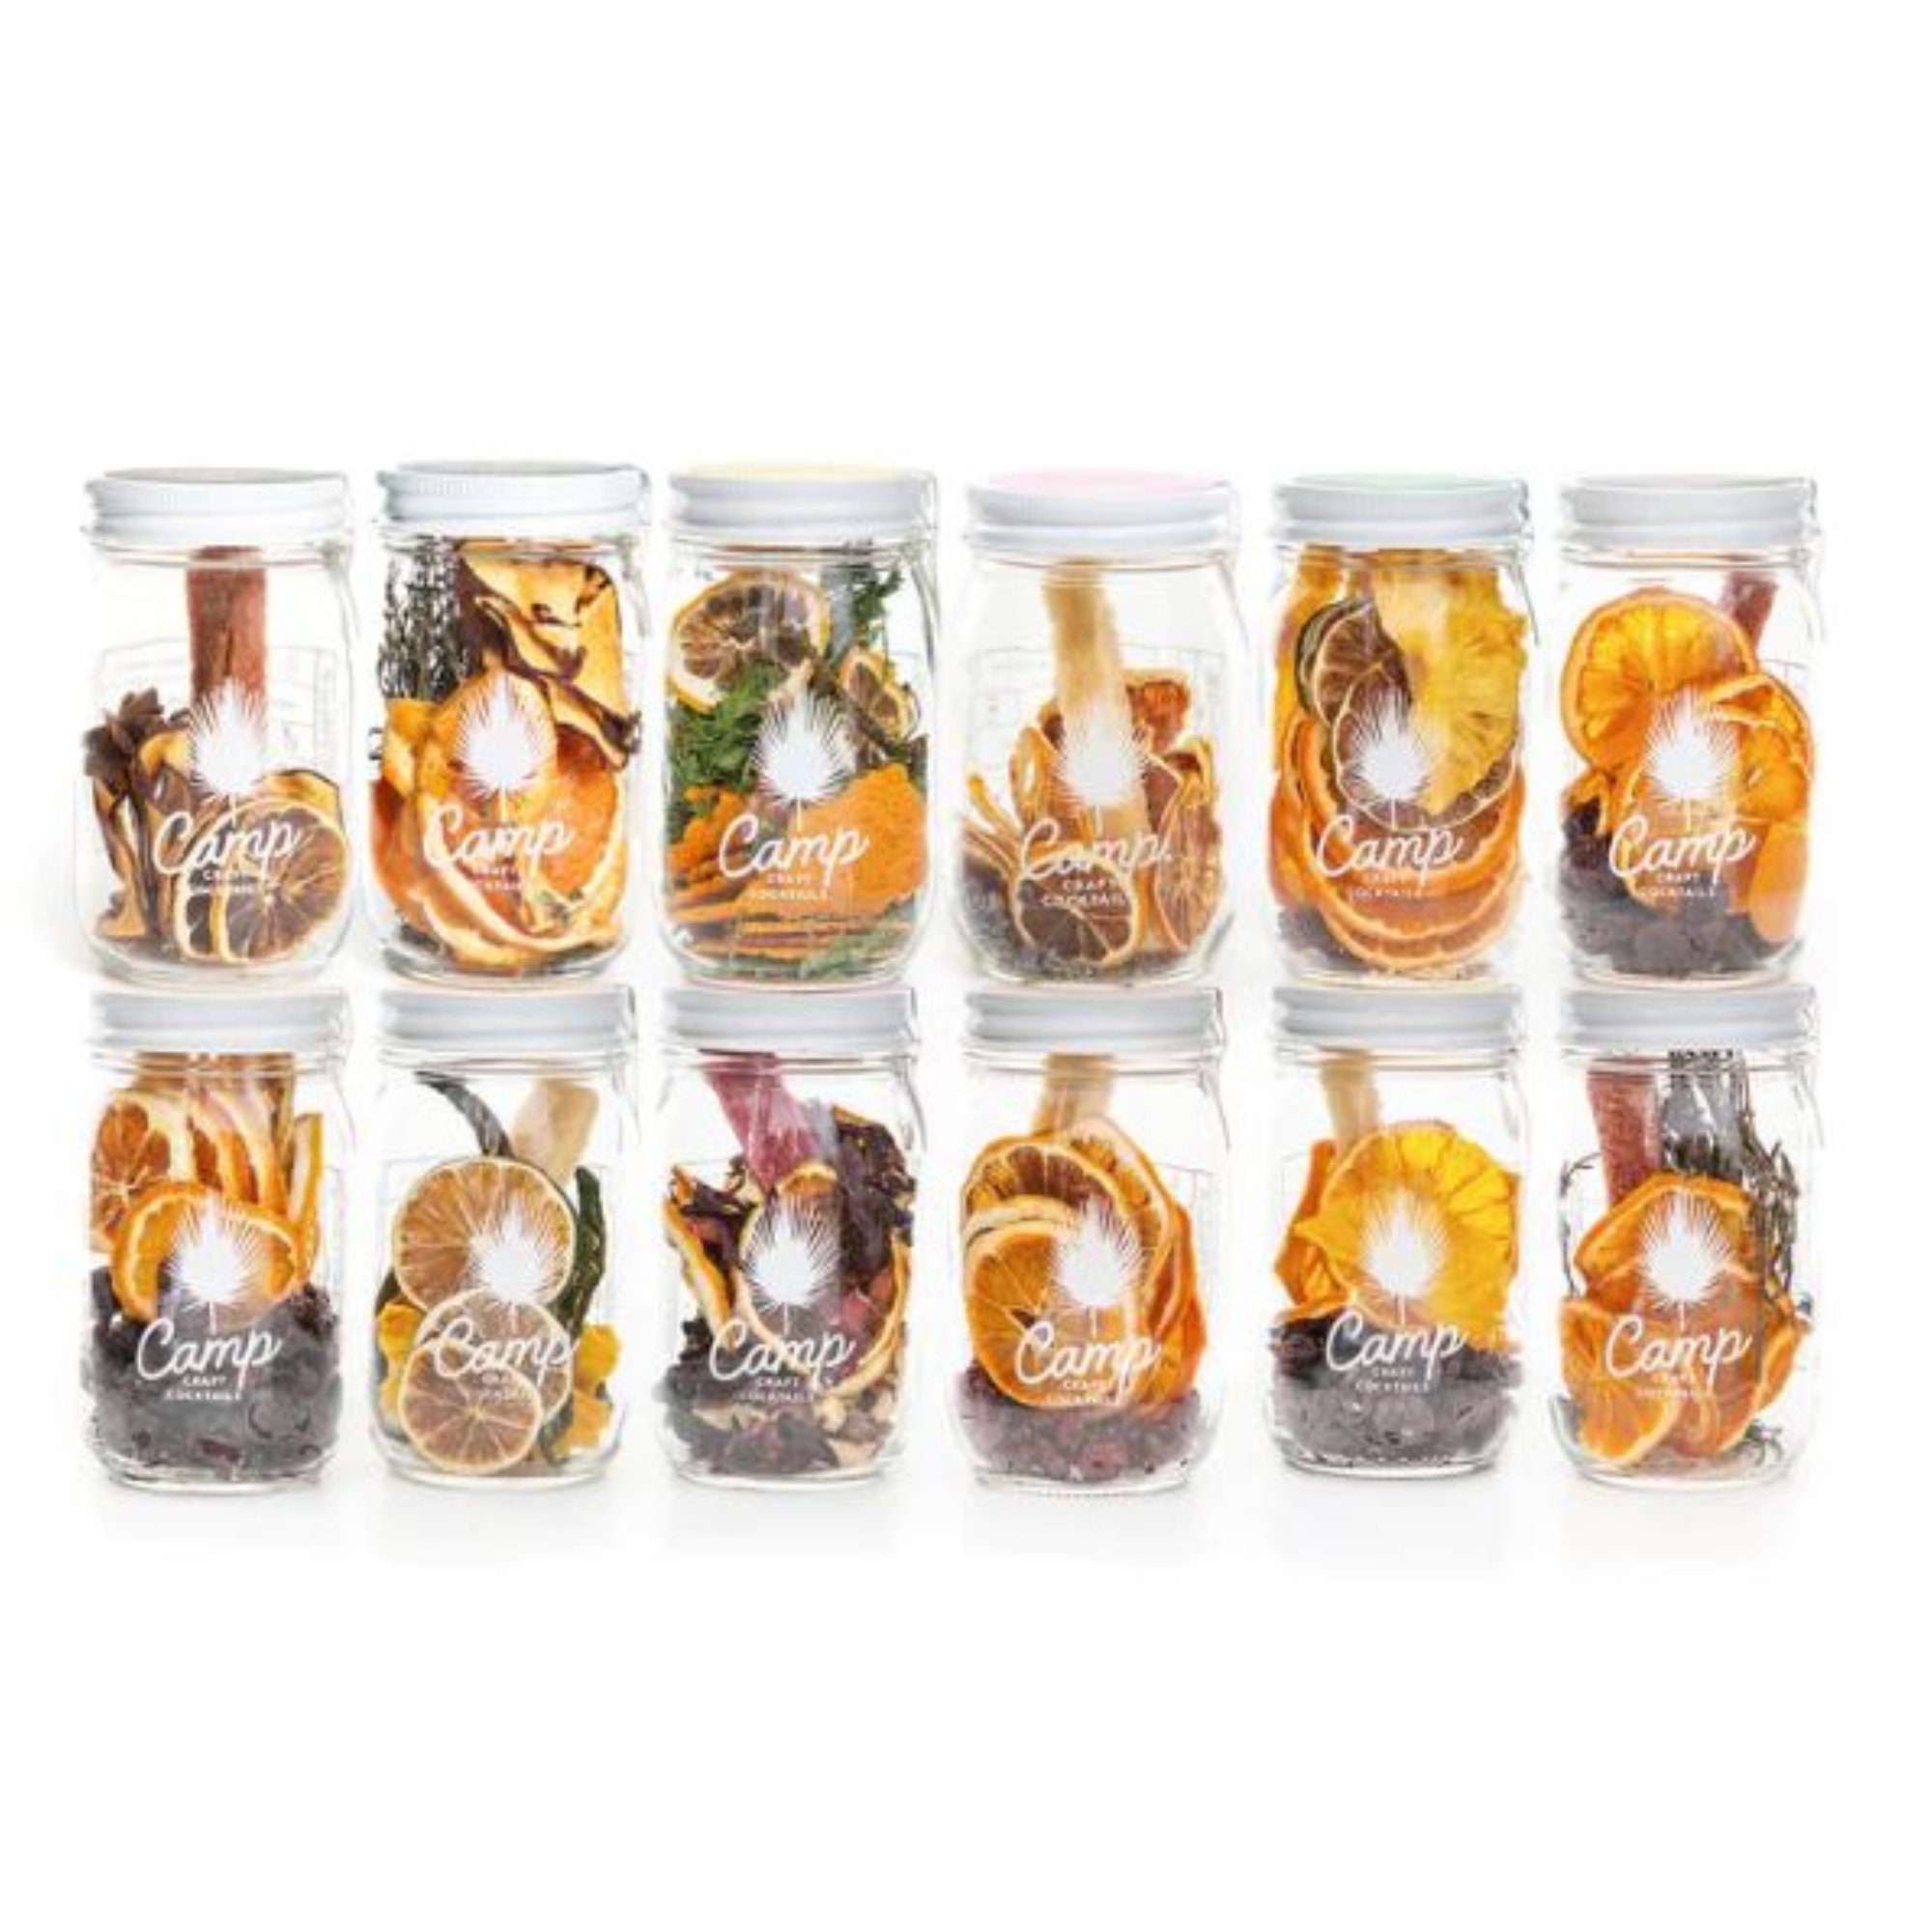 CAMP CRAFT COCKTAILS Infusion Kit Infuser Alcohol Choose